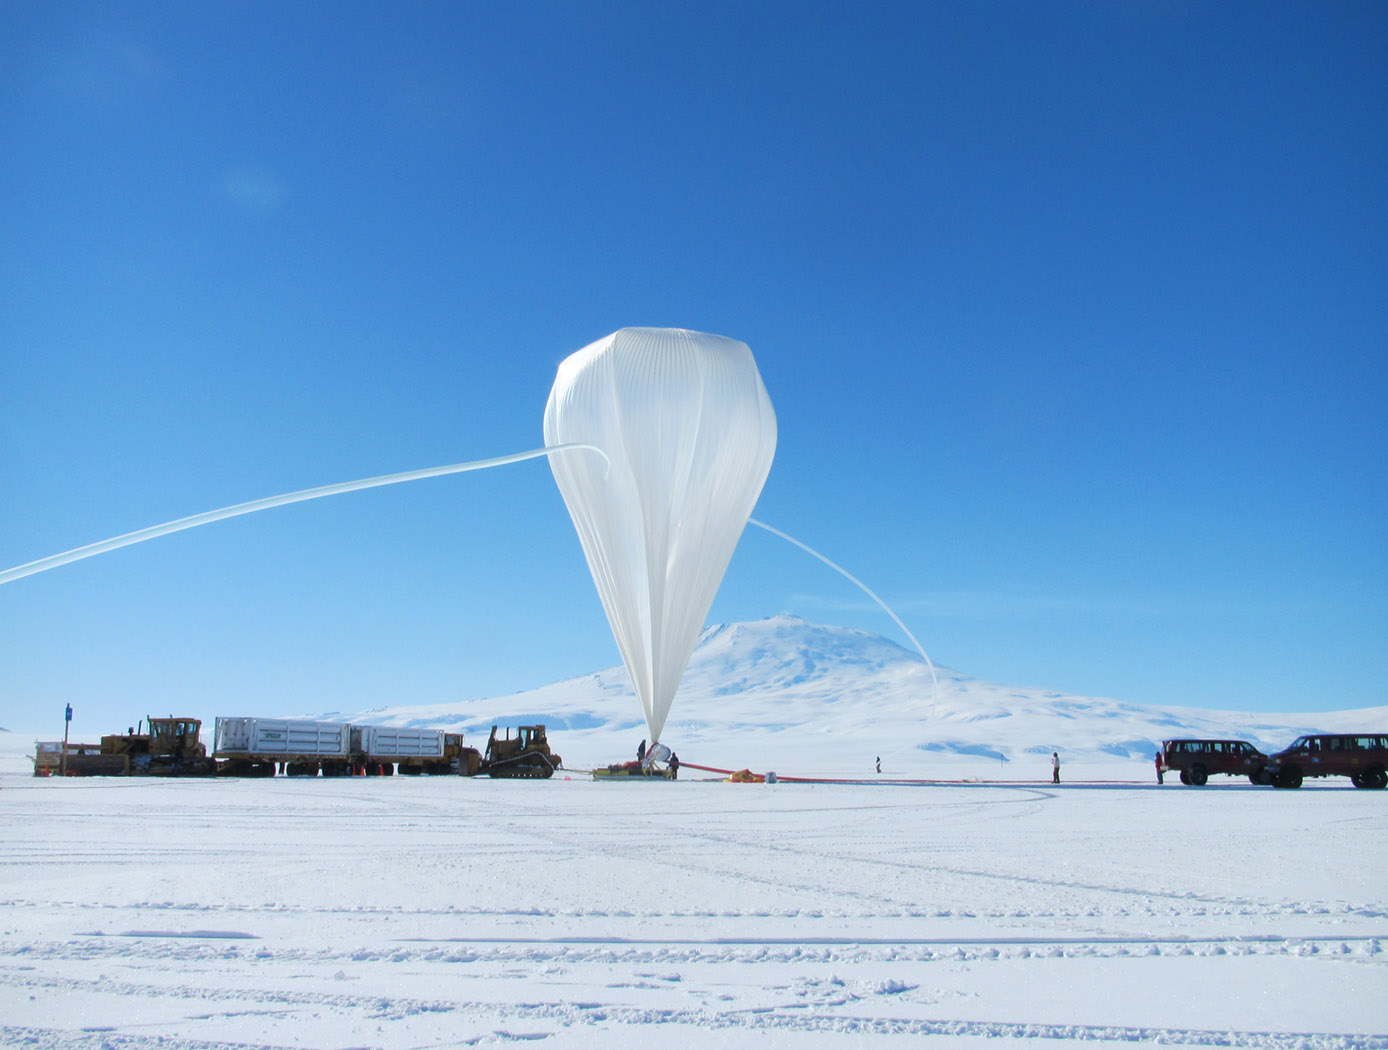 NASA image captured December 25, 2011. A NASA scientific balloon awaits launch in McMurdo, Antarctica. The balloon, carrying Indiana University's Cosmic Ray Electron Synchrotron Telescope (CREST), was launched on December 25. After a circum-navigational flight around the South Pole, the payload landed on January 5. The CREST payload is one of two scheduled as part of this seasons' annual NASA Antarctic balloon Campaign which is conducted in cooperation with the National Science Foundation's Office of Polar Programs. The campaign's second payload is the University of Arizona's Stratospheric Terahertz Observatory (STO). You can follow the flights at the Columbia Scientific Balloon Facility's web site at www.csbf.nasa.gov/antarctica/ice.htm